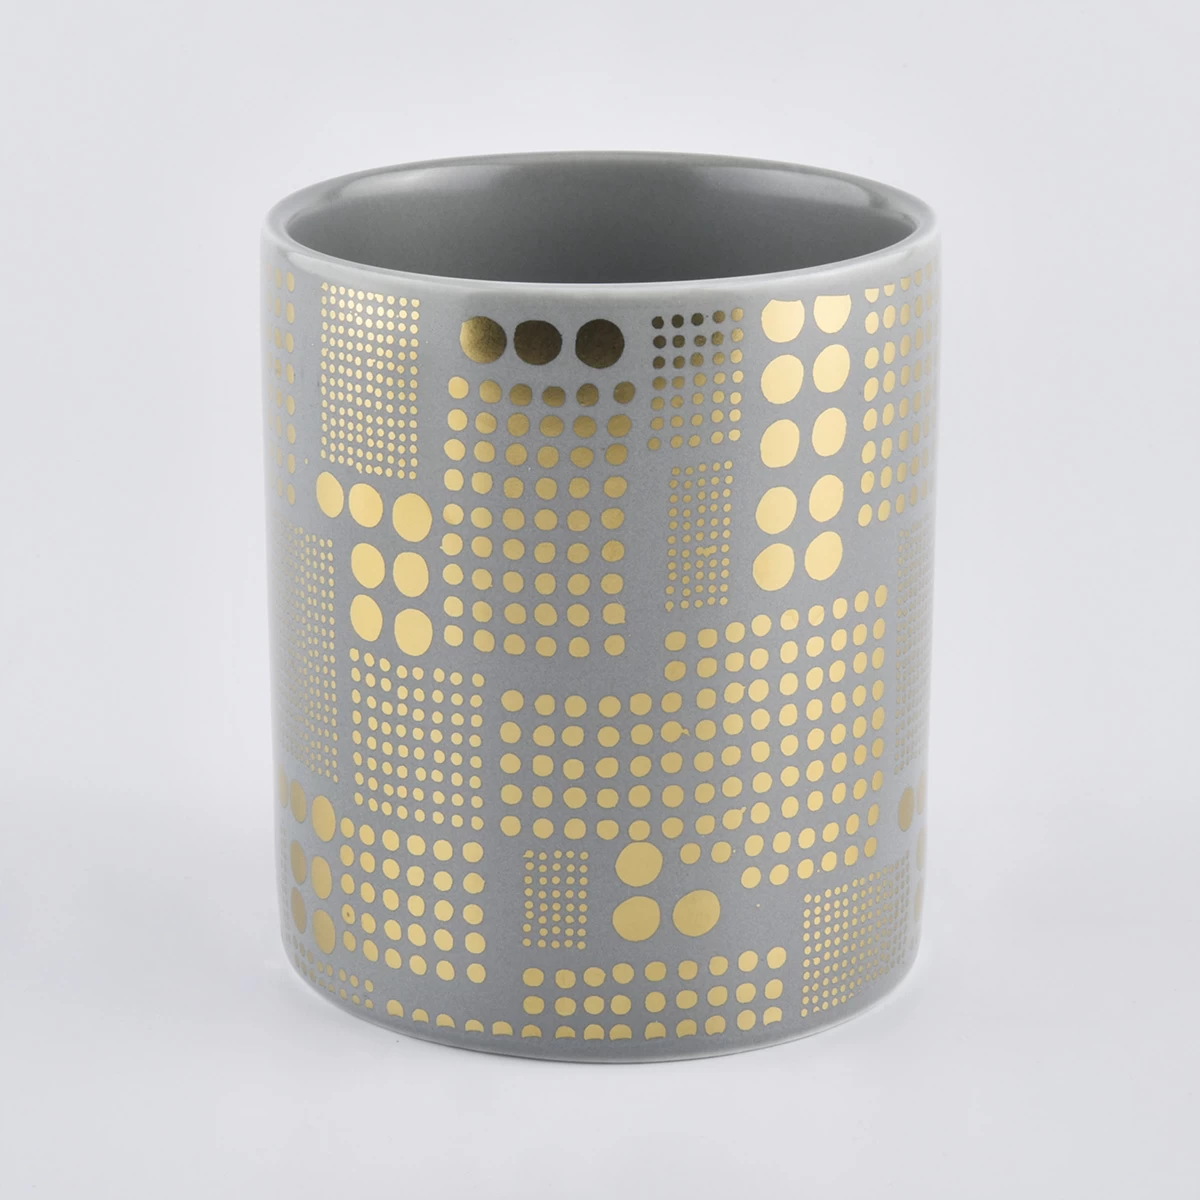 Gray ceramic candle vessels with shiny gold pattern, unique ceramic container for candle making